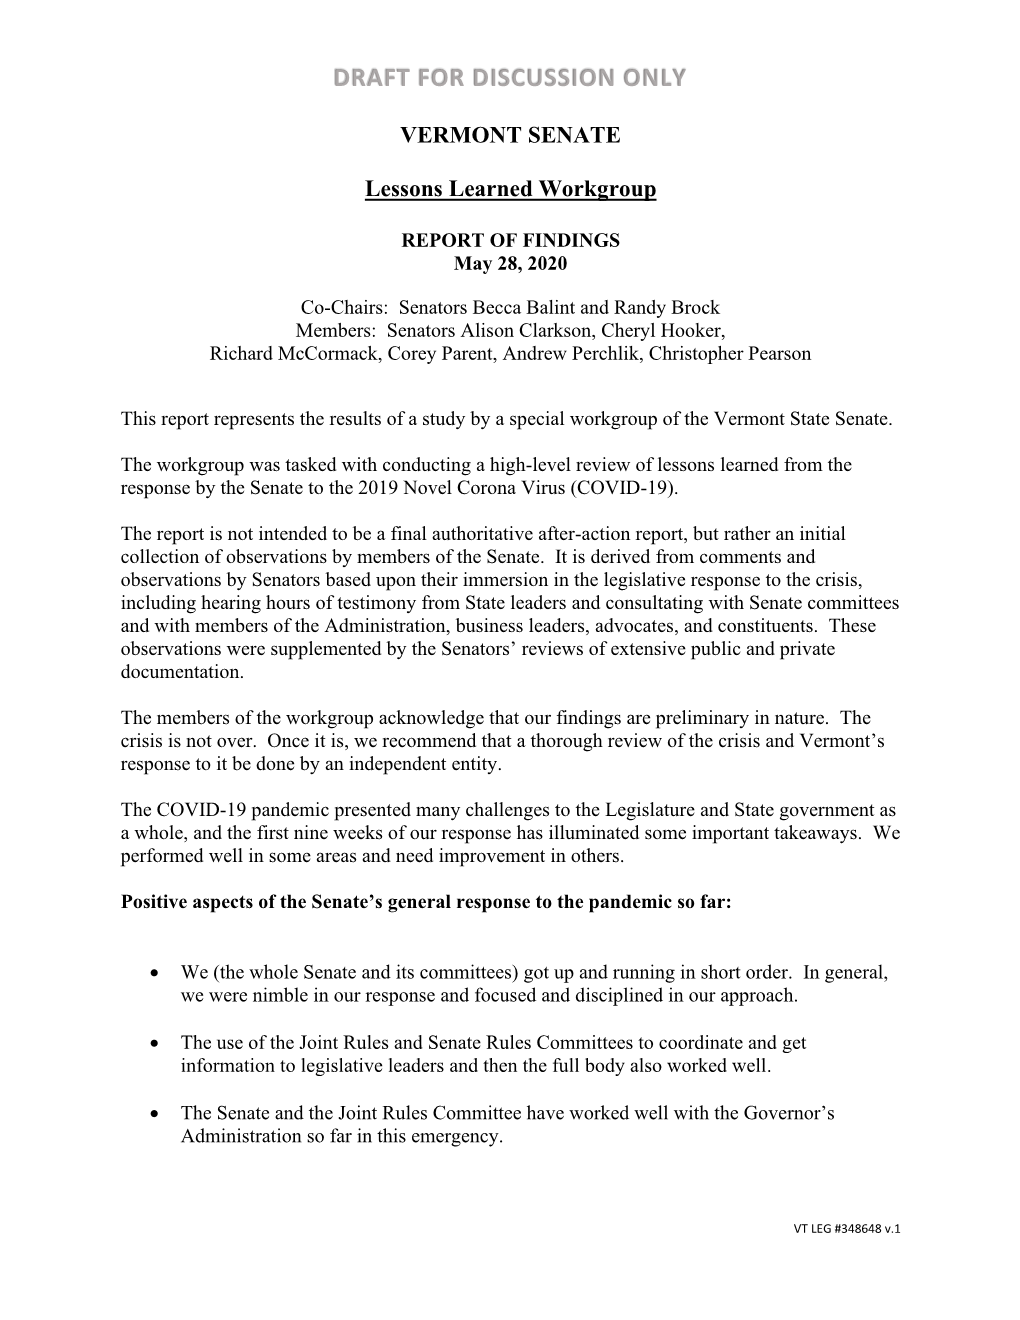 Randy Brock and Becca Balint: Lessons Learned Final Report